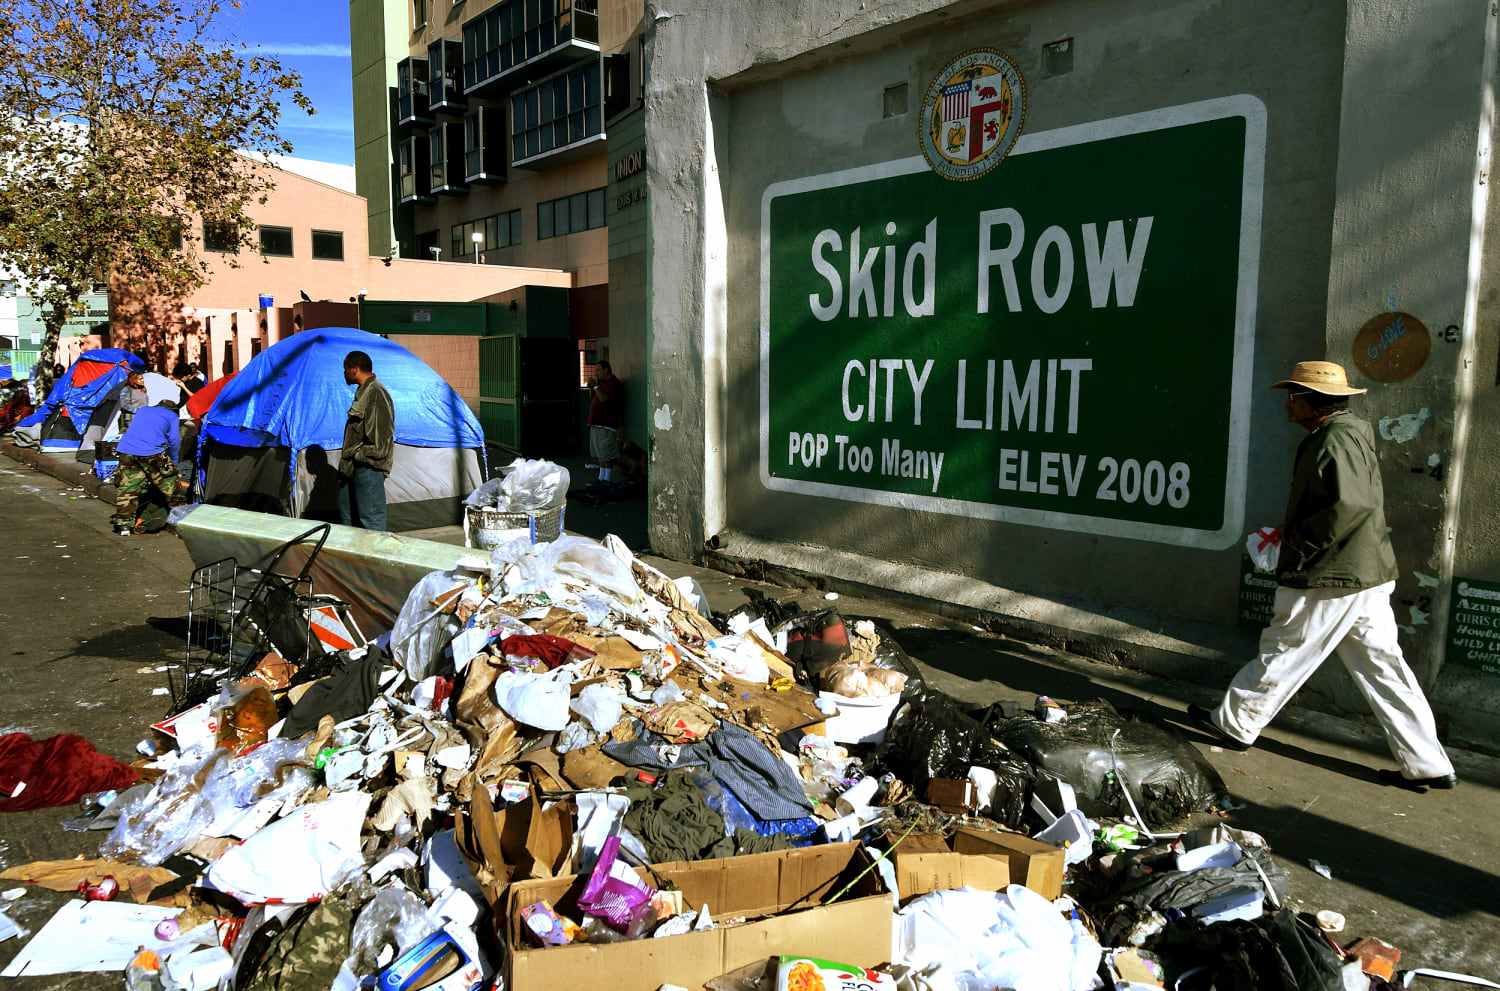 Typhus Zone Rats And Trash Infest Los Angeles Skid Row Fueling Disease